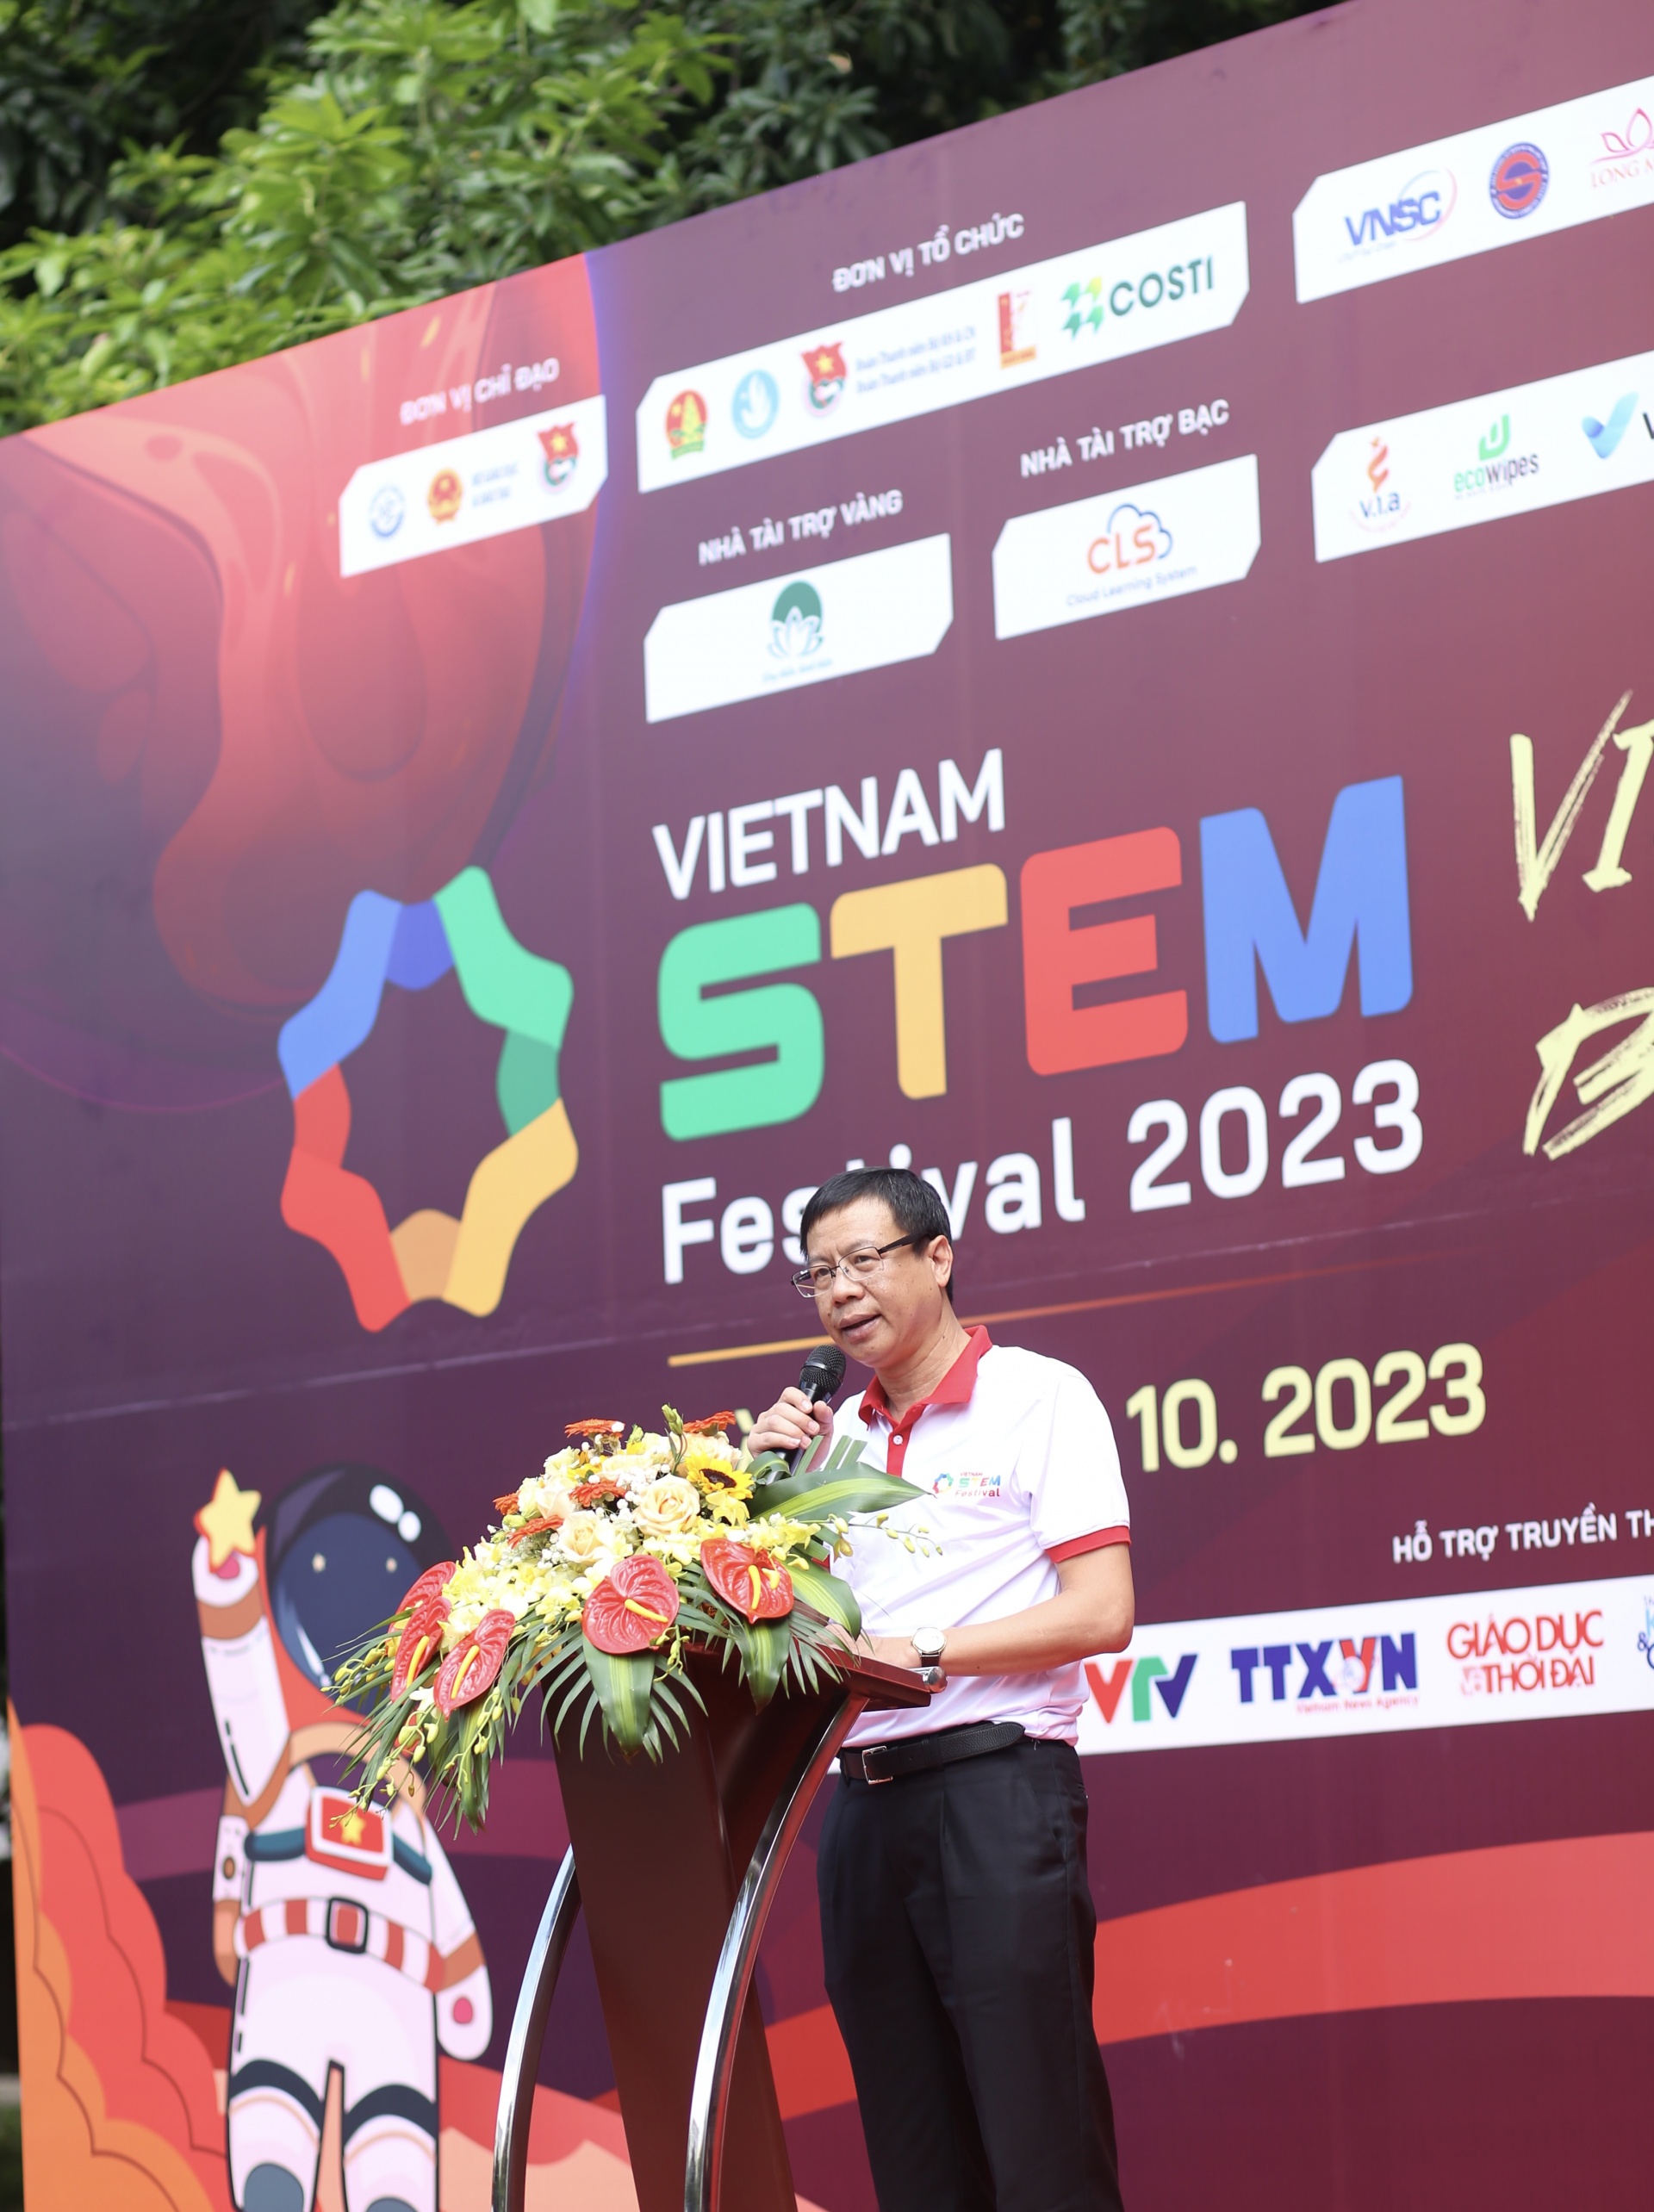 Vietnam STEM Festival promotes application of science and technology